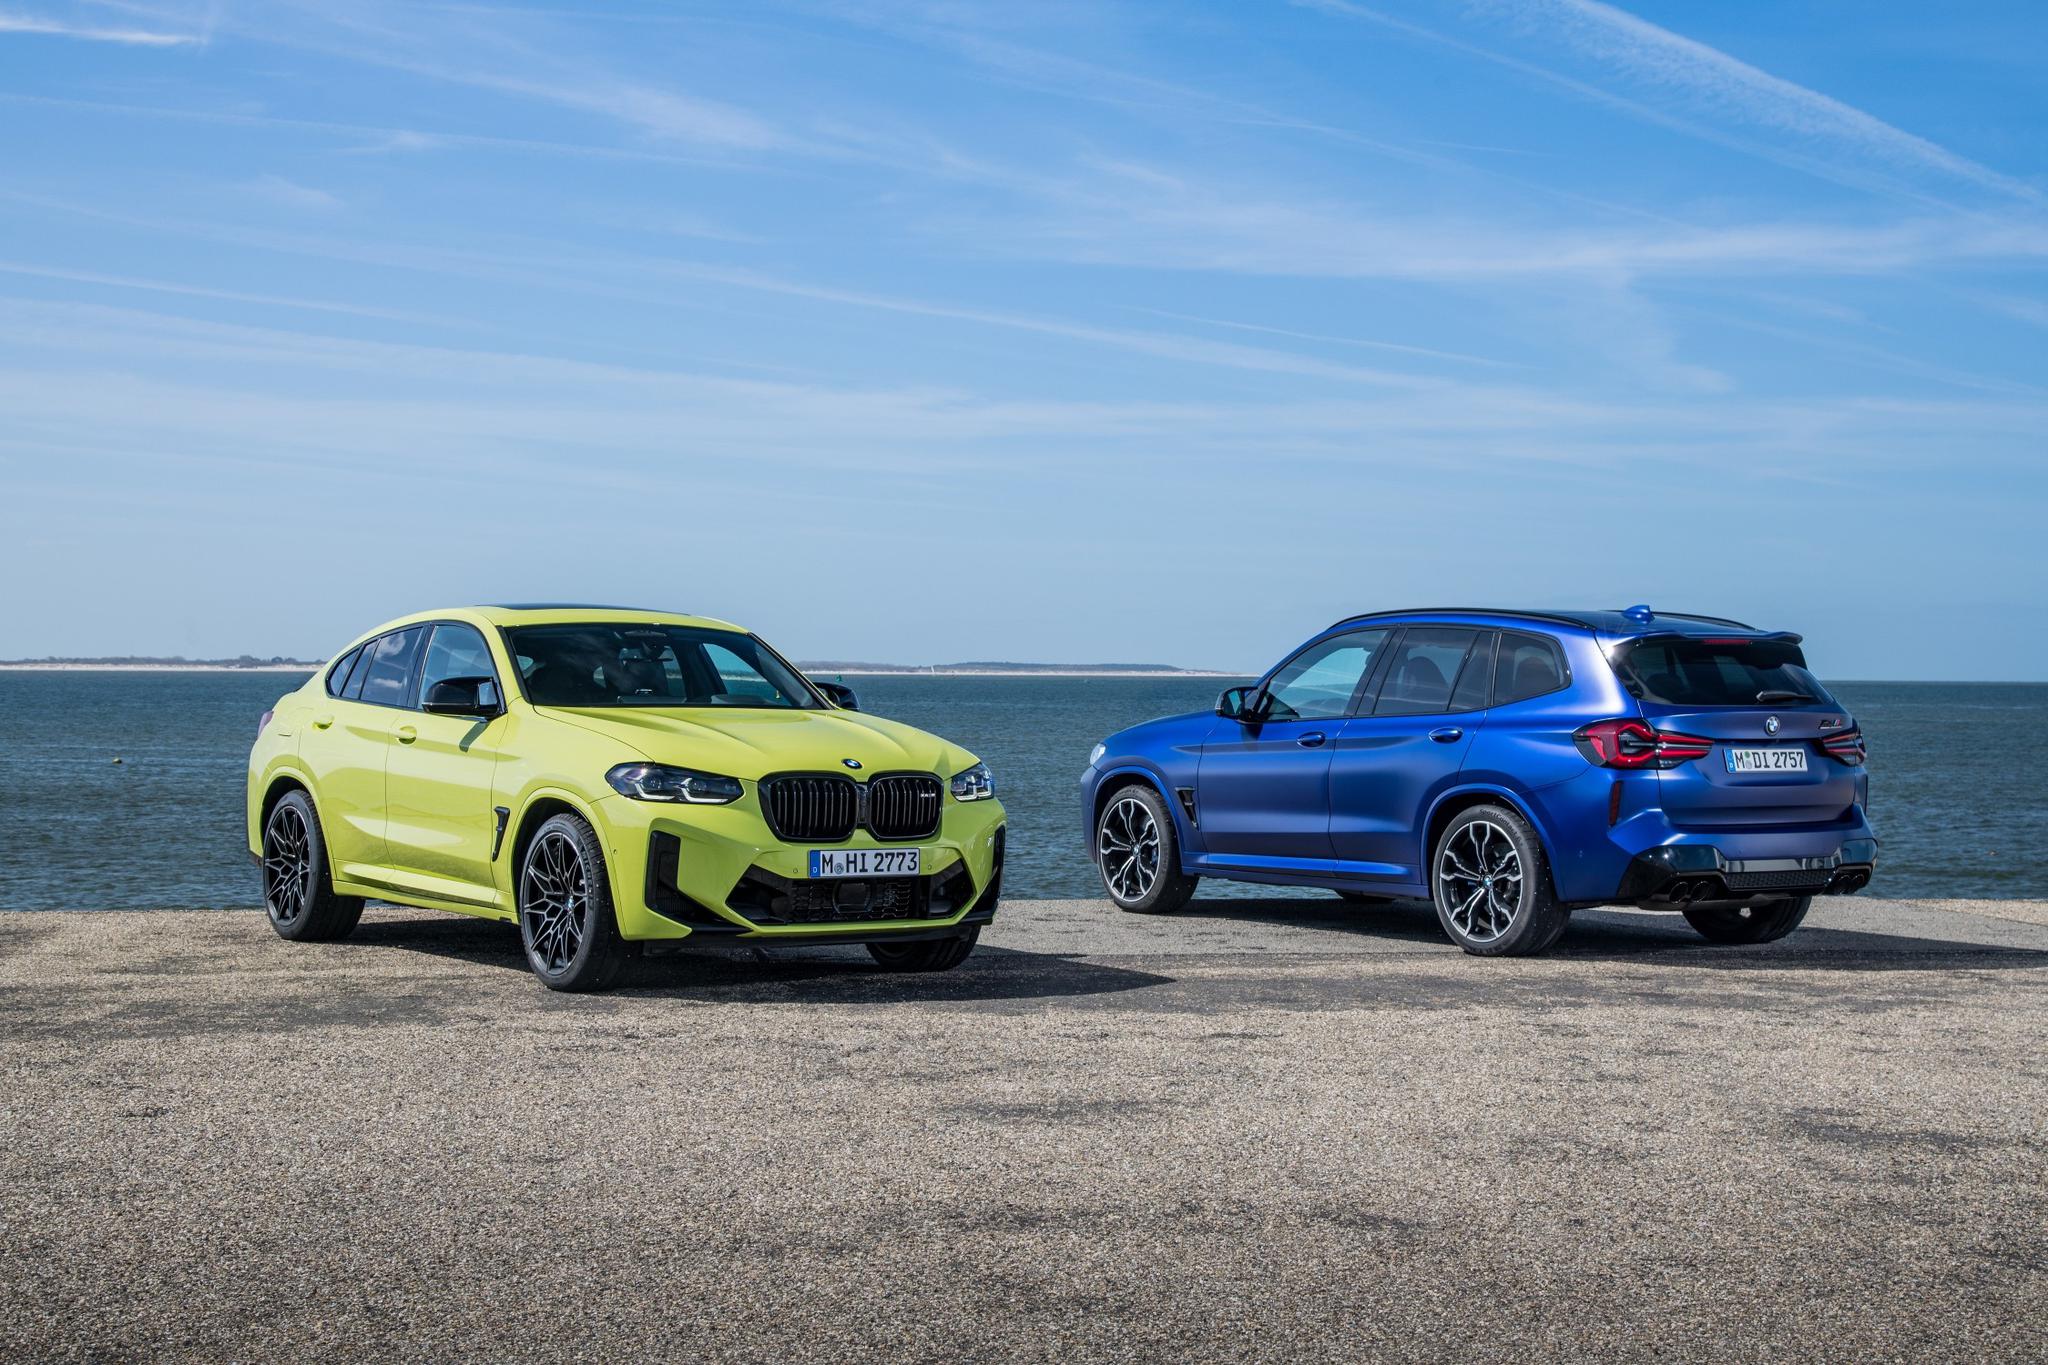 The face-lifted BMW X3 M and X4 M Competition models